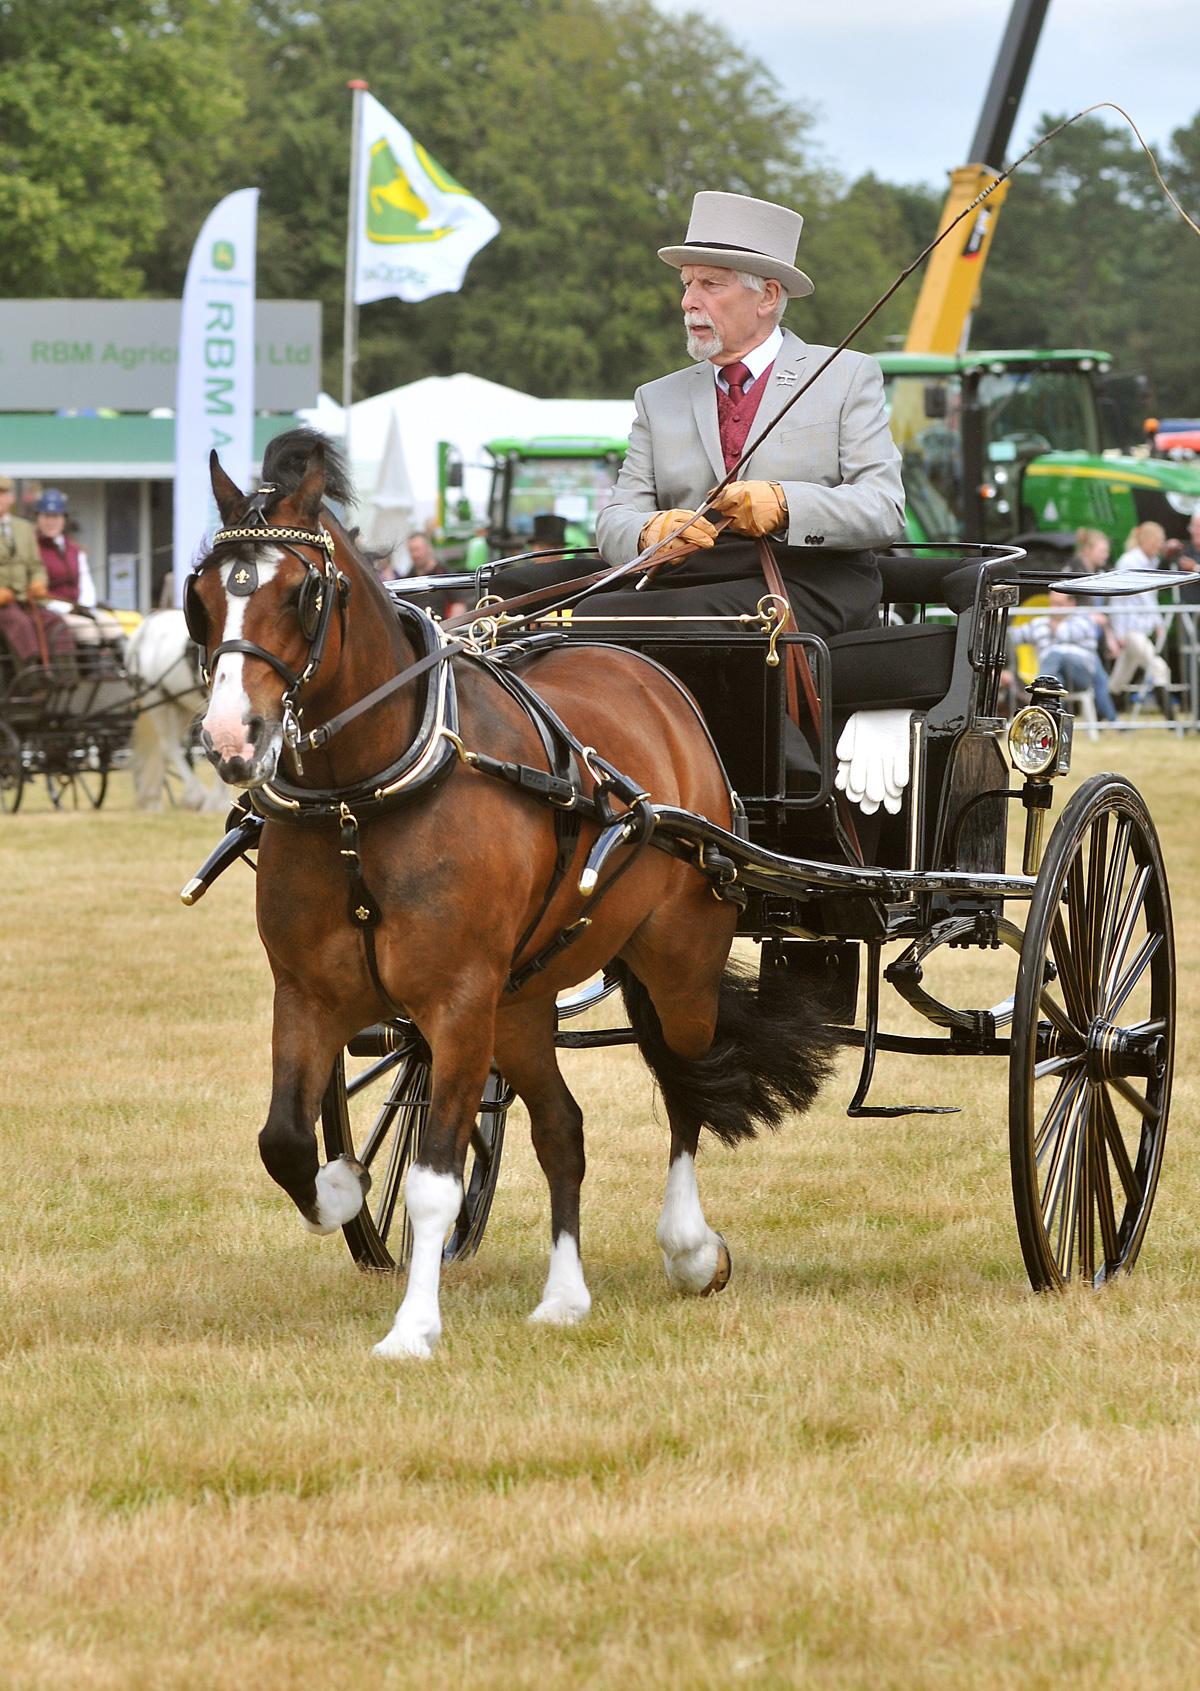 Images from Malton Show 2014